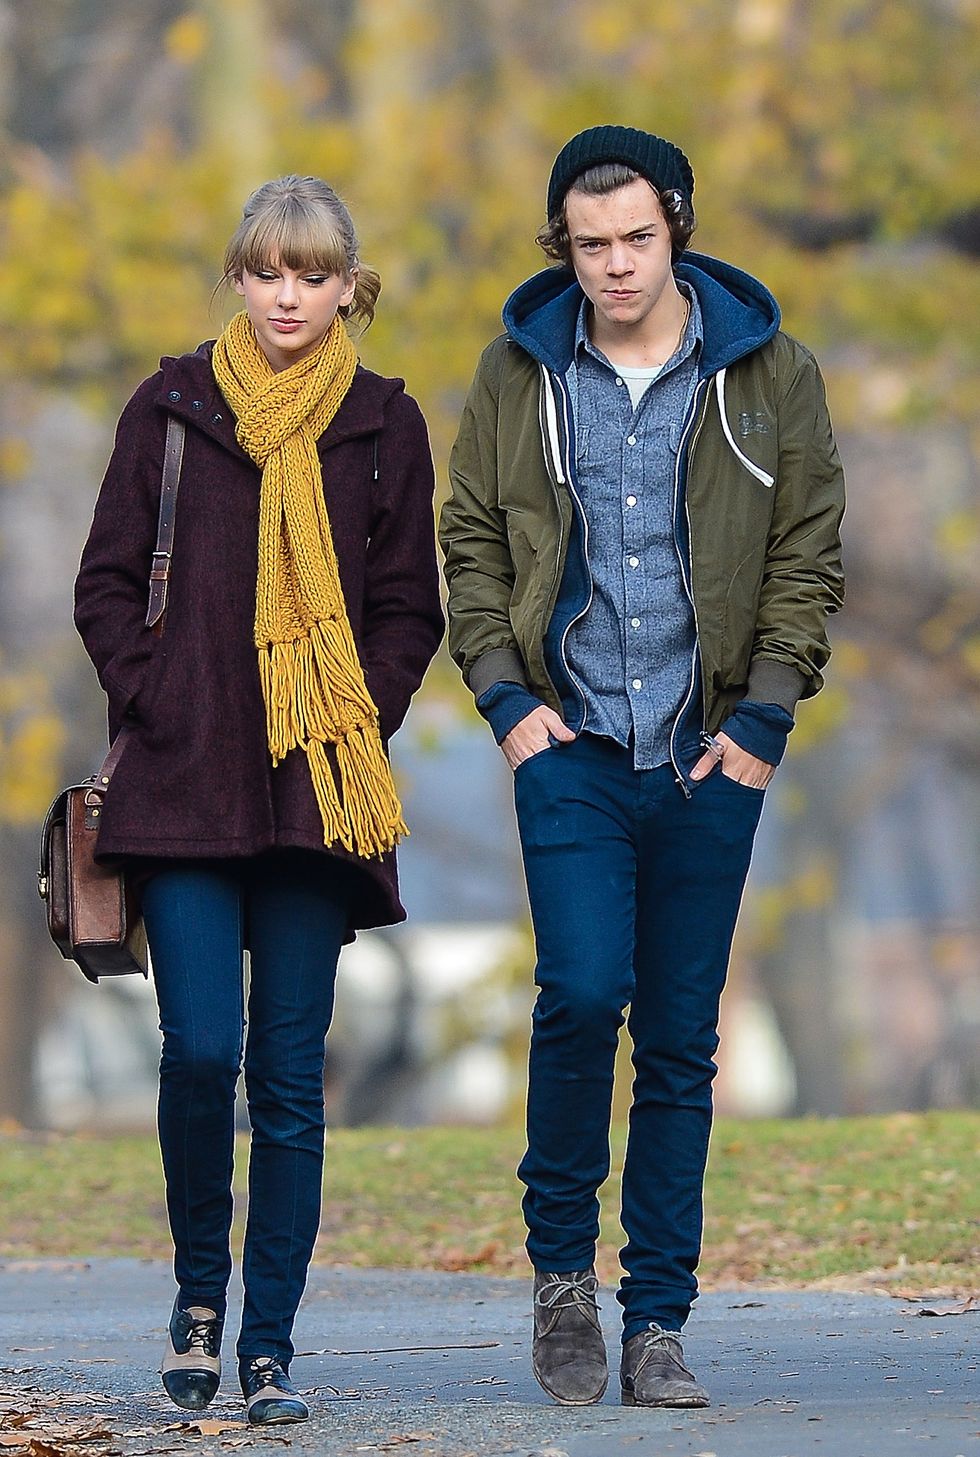 taylor swift and harry styles at central park zoo in 2012